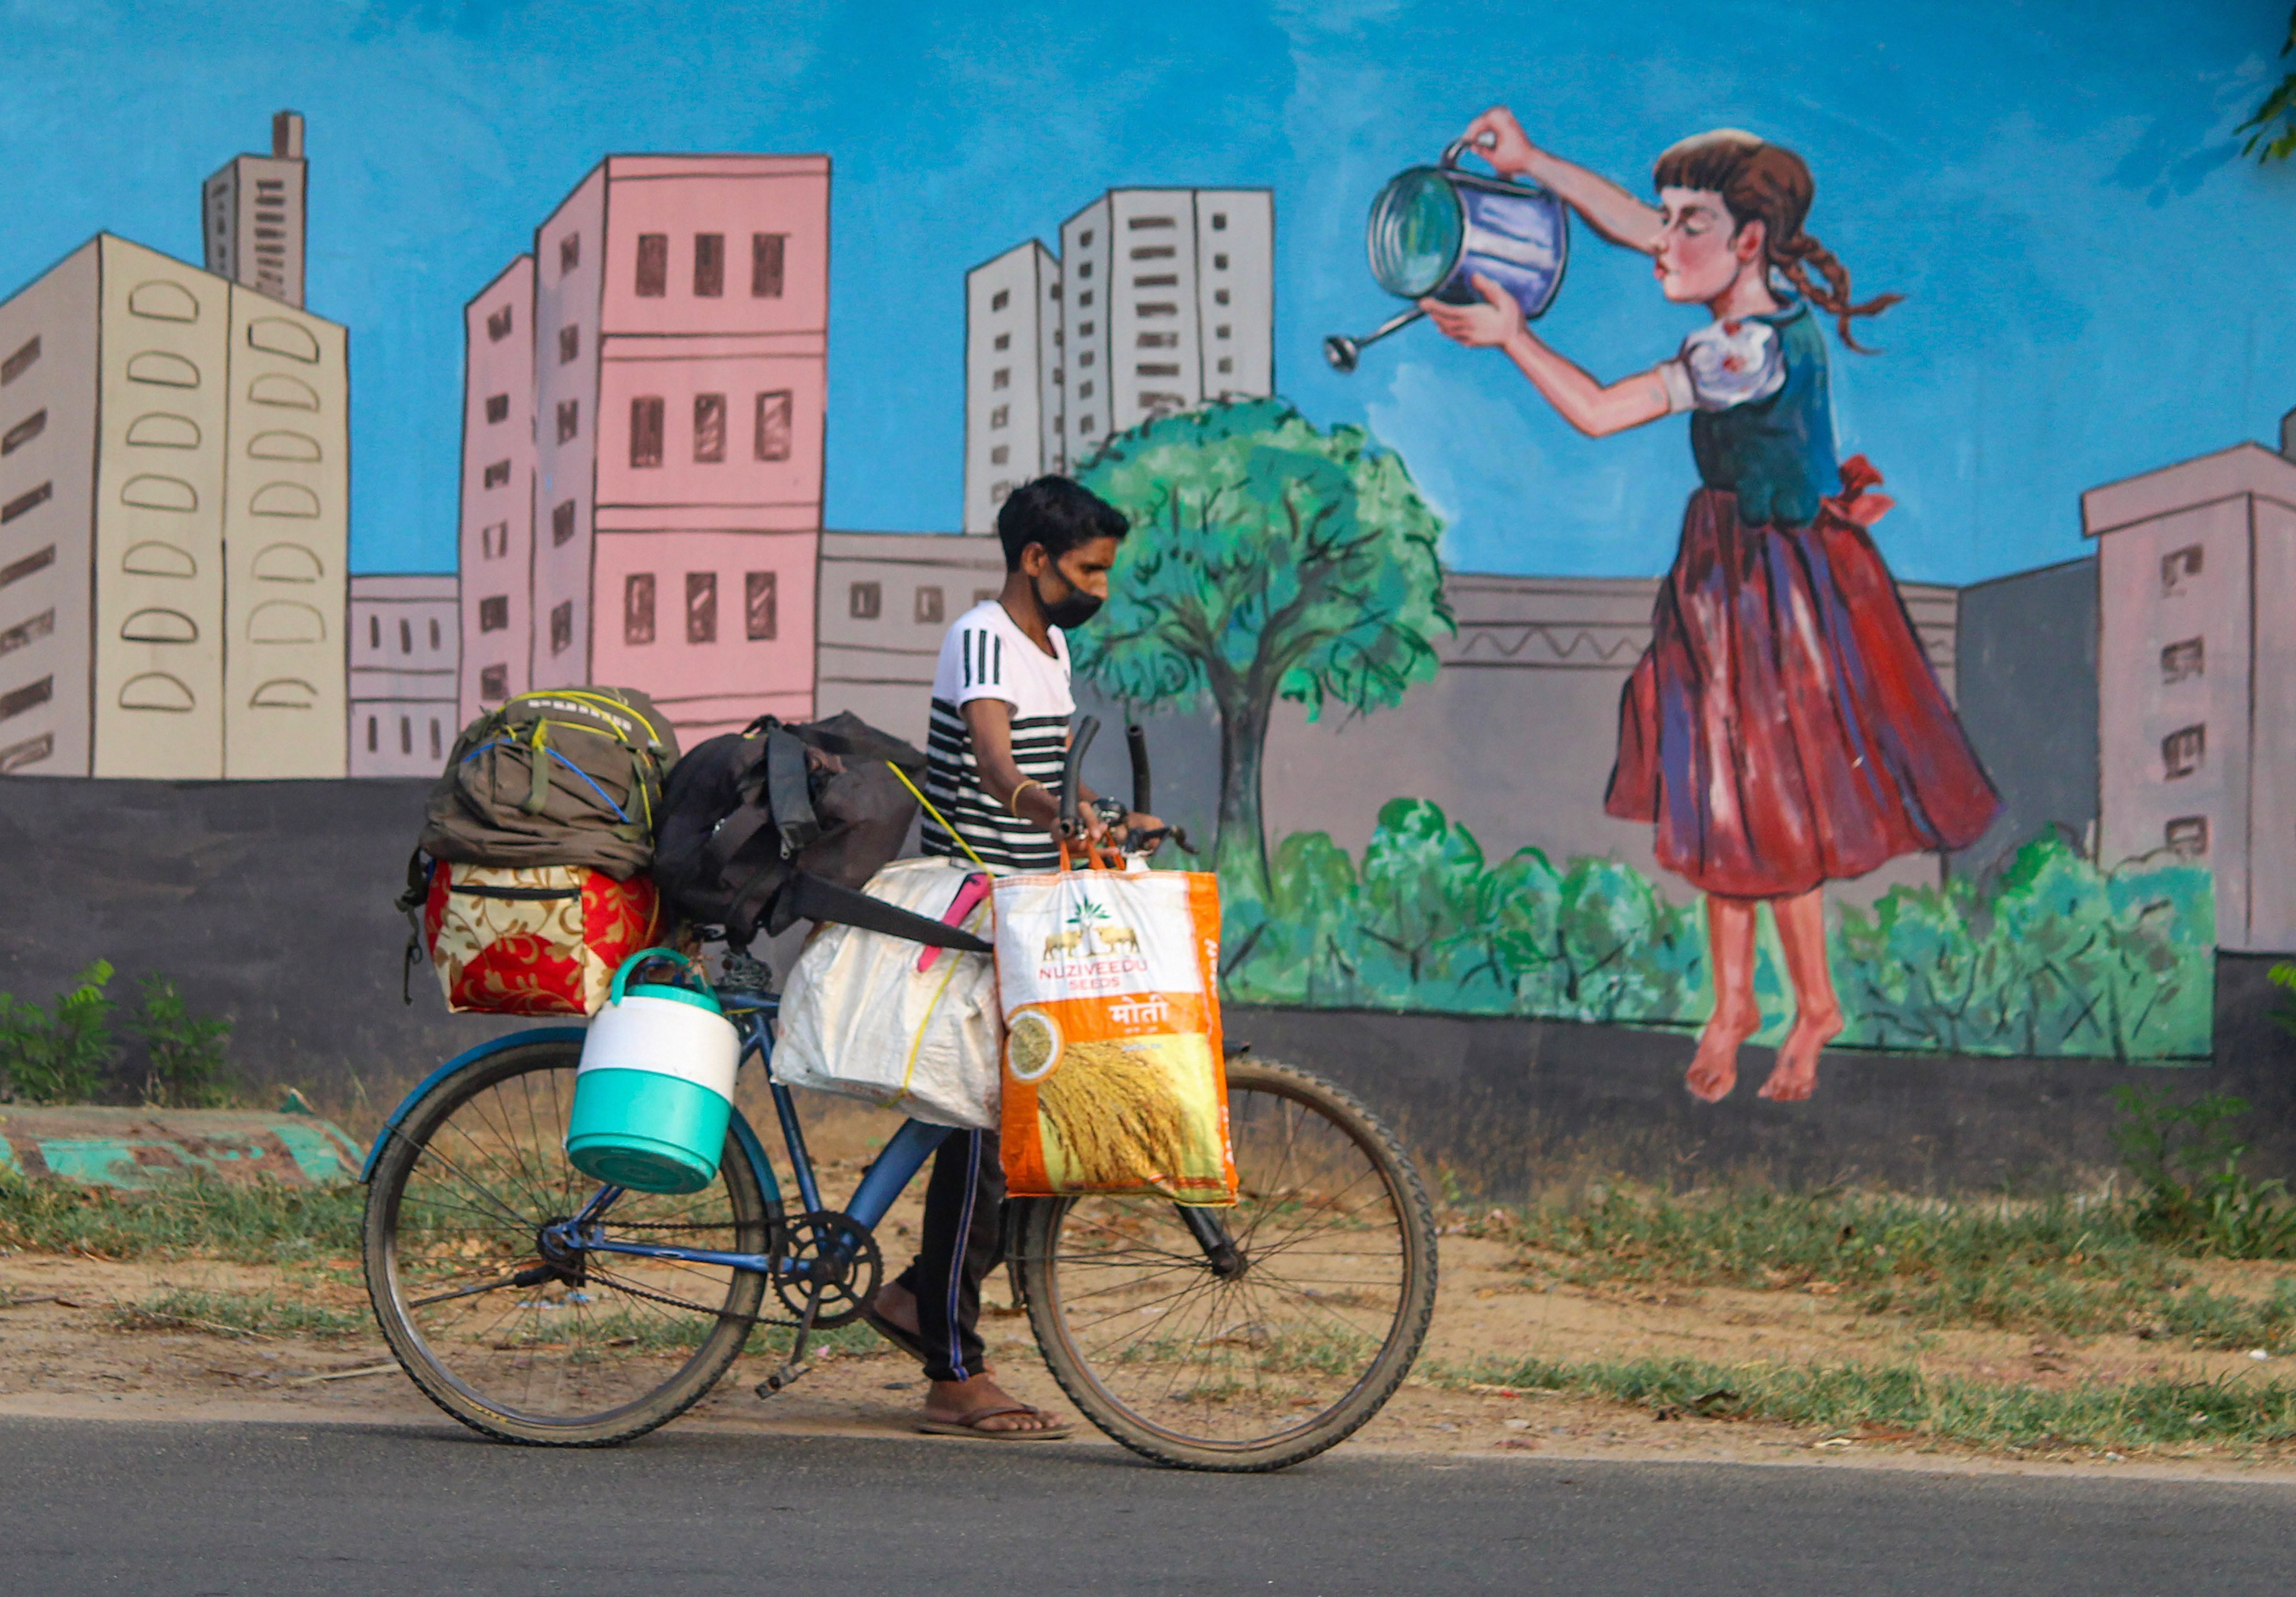 Gurugram: A migrant pulls his bicycle as he walks towards his native state, during the ongoing COVID-19 lockdown, near Sector 15 in Gurugram, Sunday, June 14, 2020. (PTI Photo)(PTI14-06-2020_000223B)